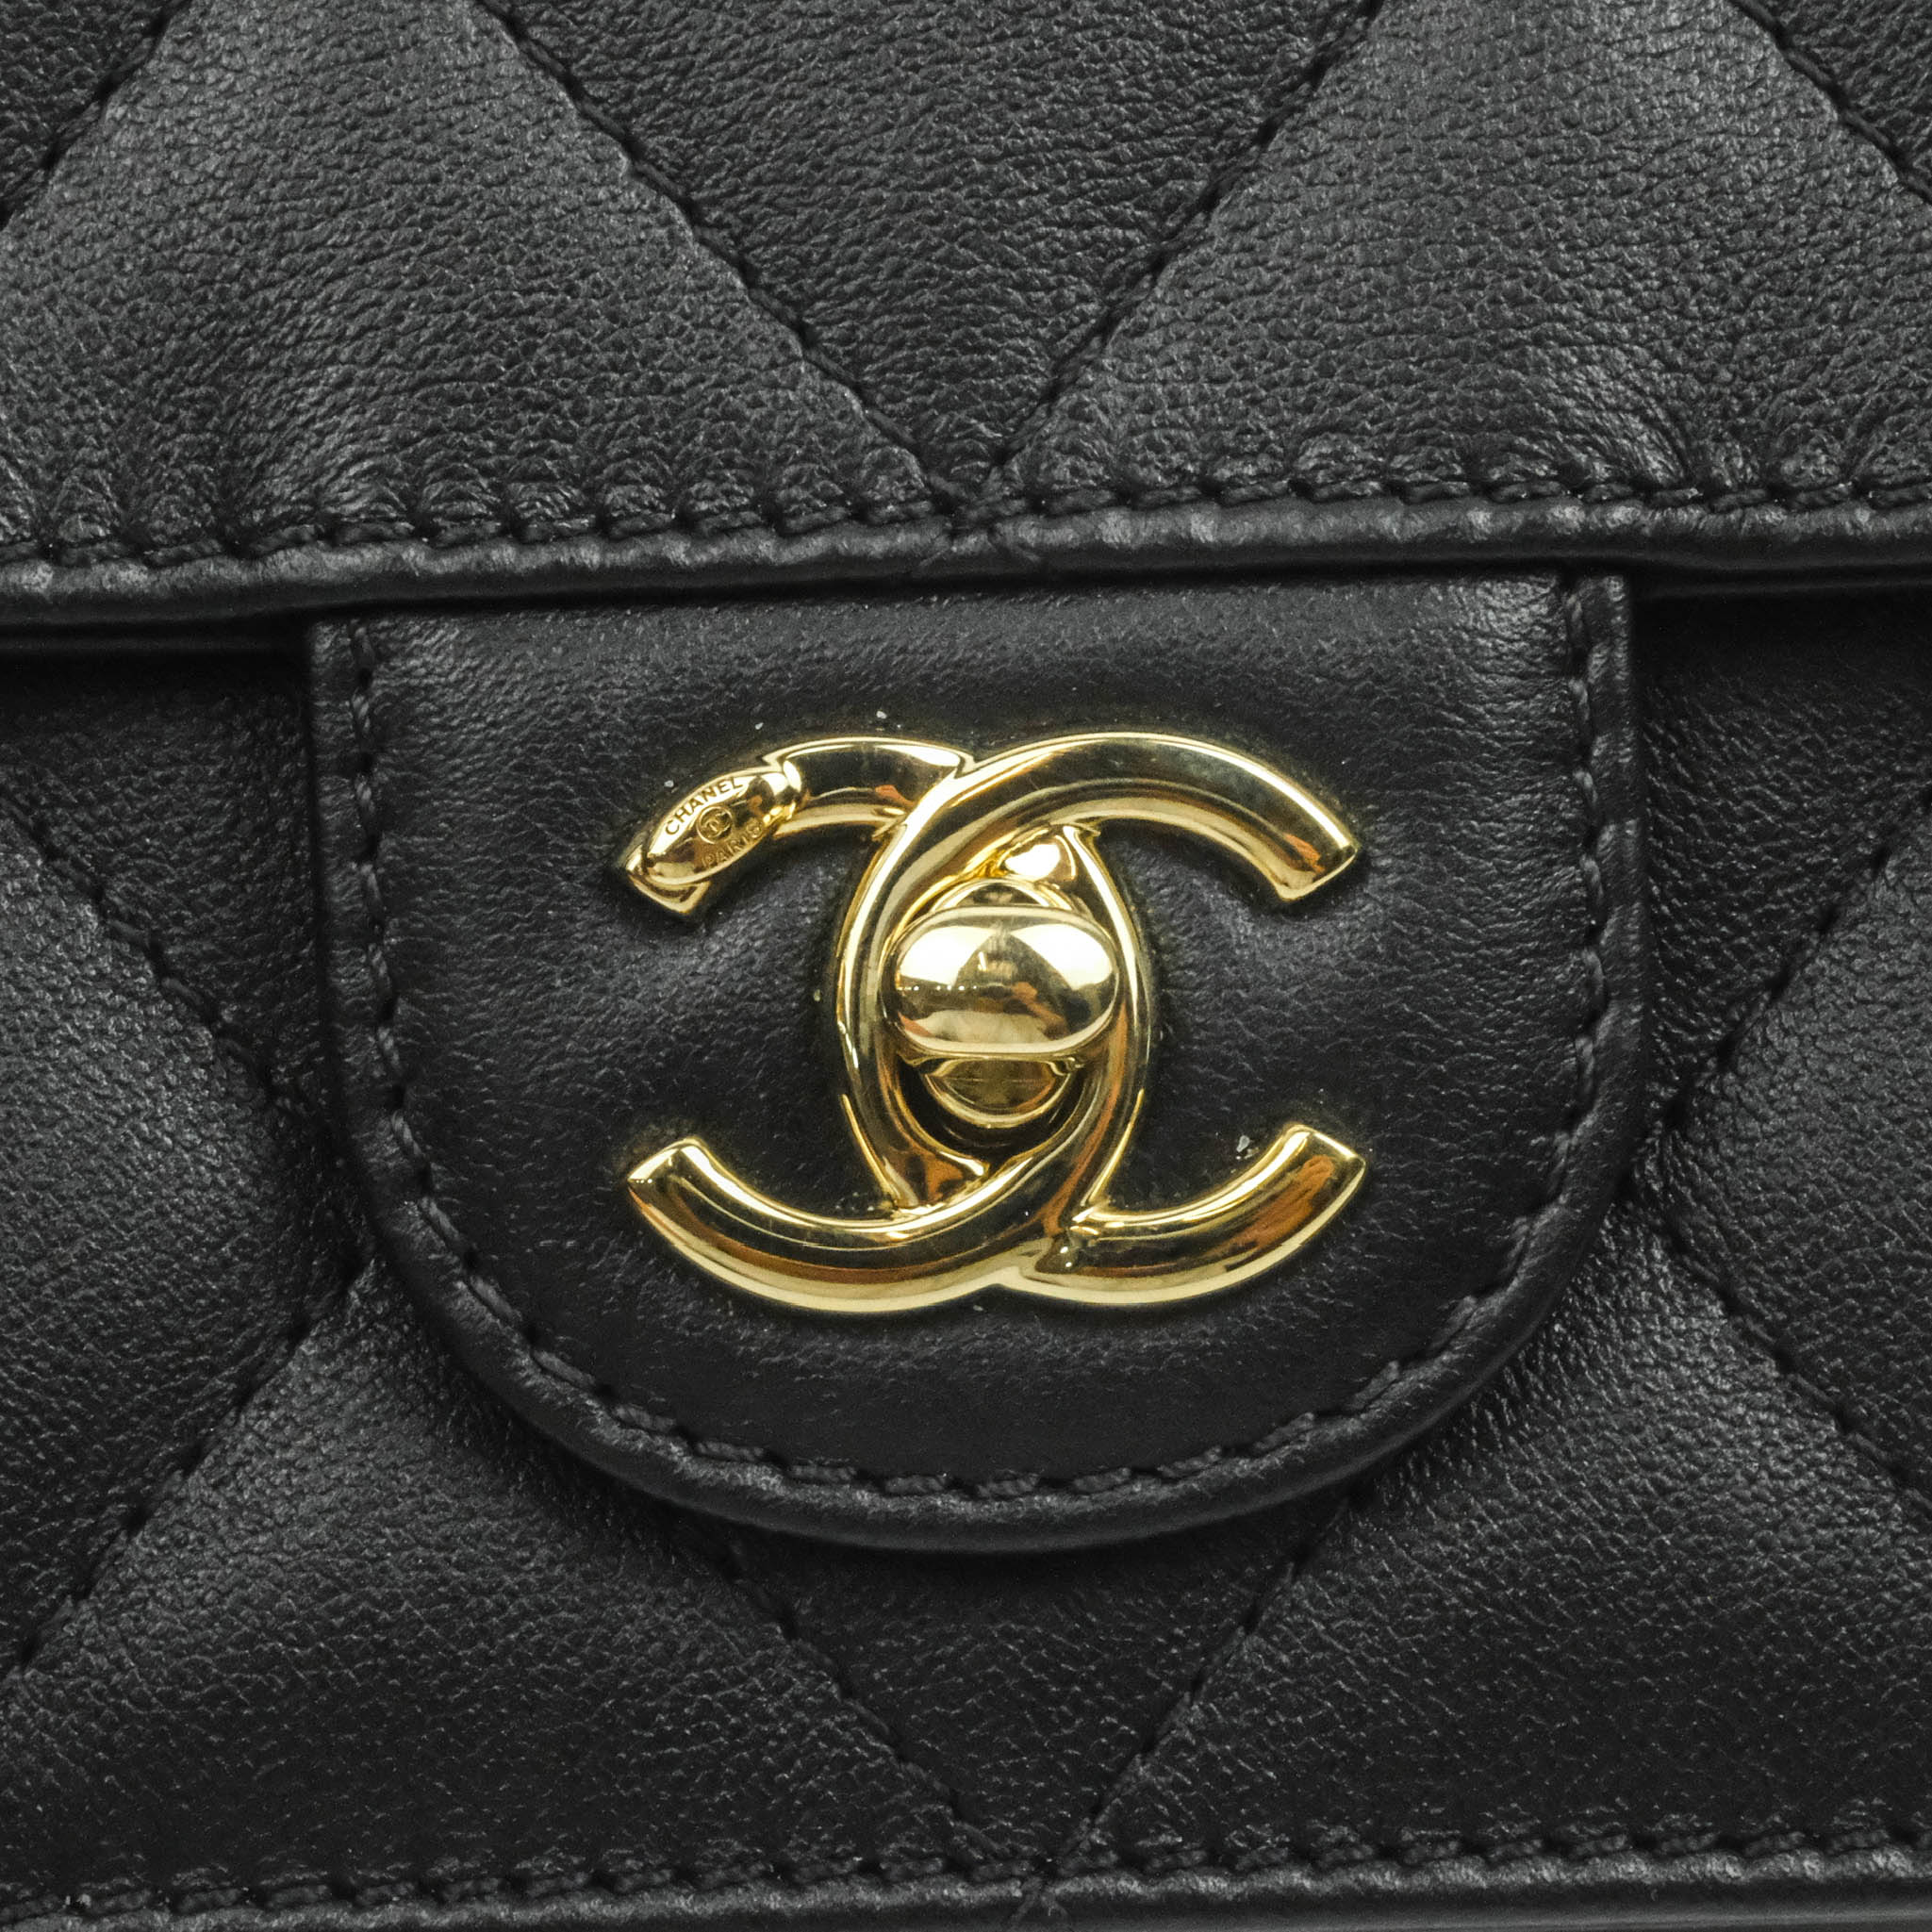 chanel classic flap gold hardware